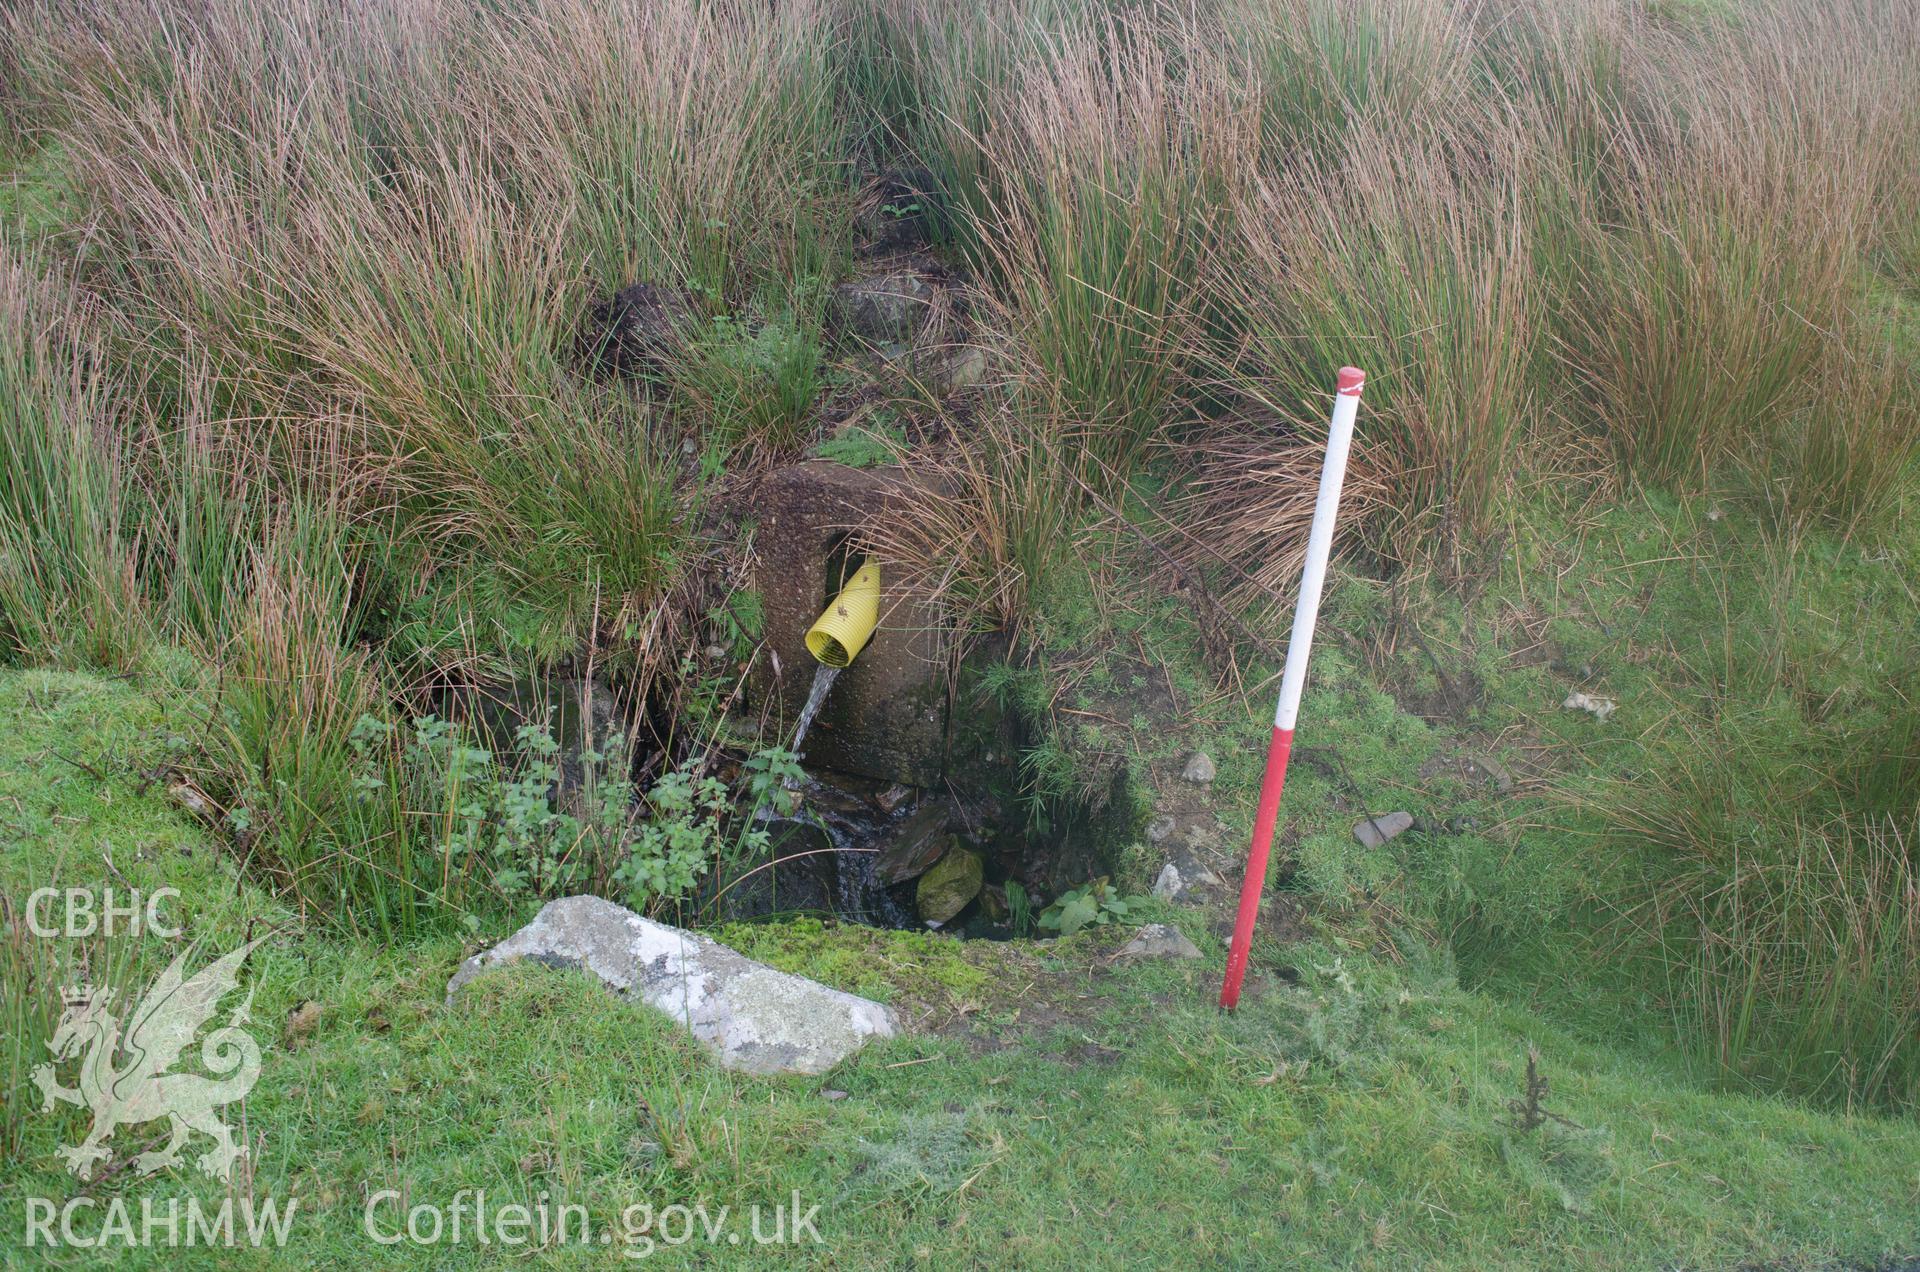 View from south east of upstream end of culvert debouching into chamber before entering culvert under the road, Llyn Gelli-Gain, Trawsfynydd. Photographed as part of archaeological assessment by Gwynedd Archaeological Trust, 16/10/2018. Project no. 2579.